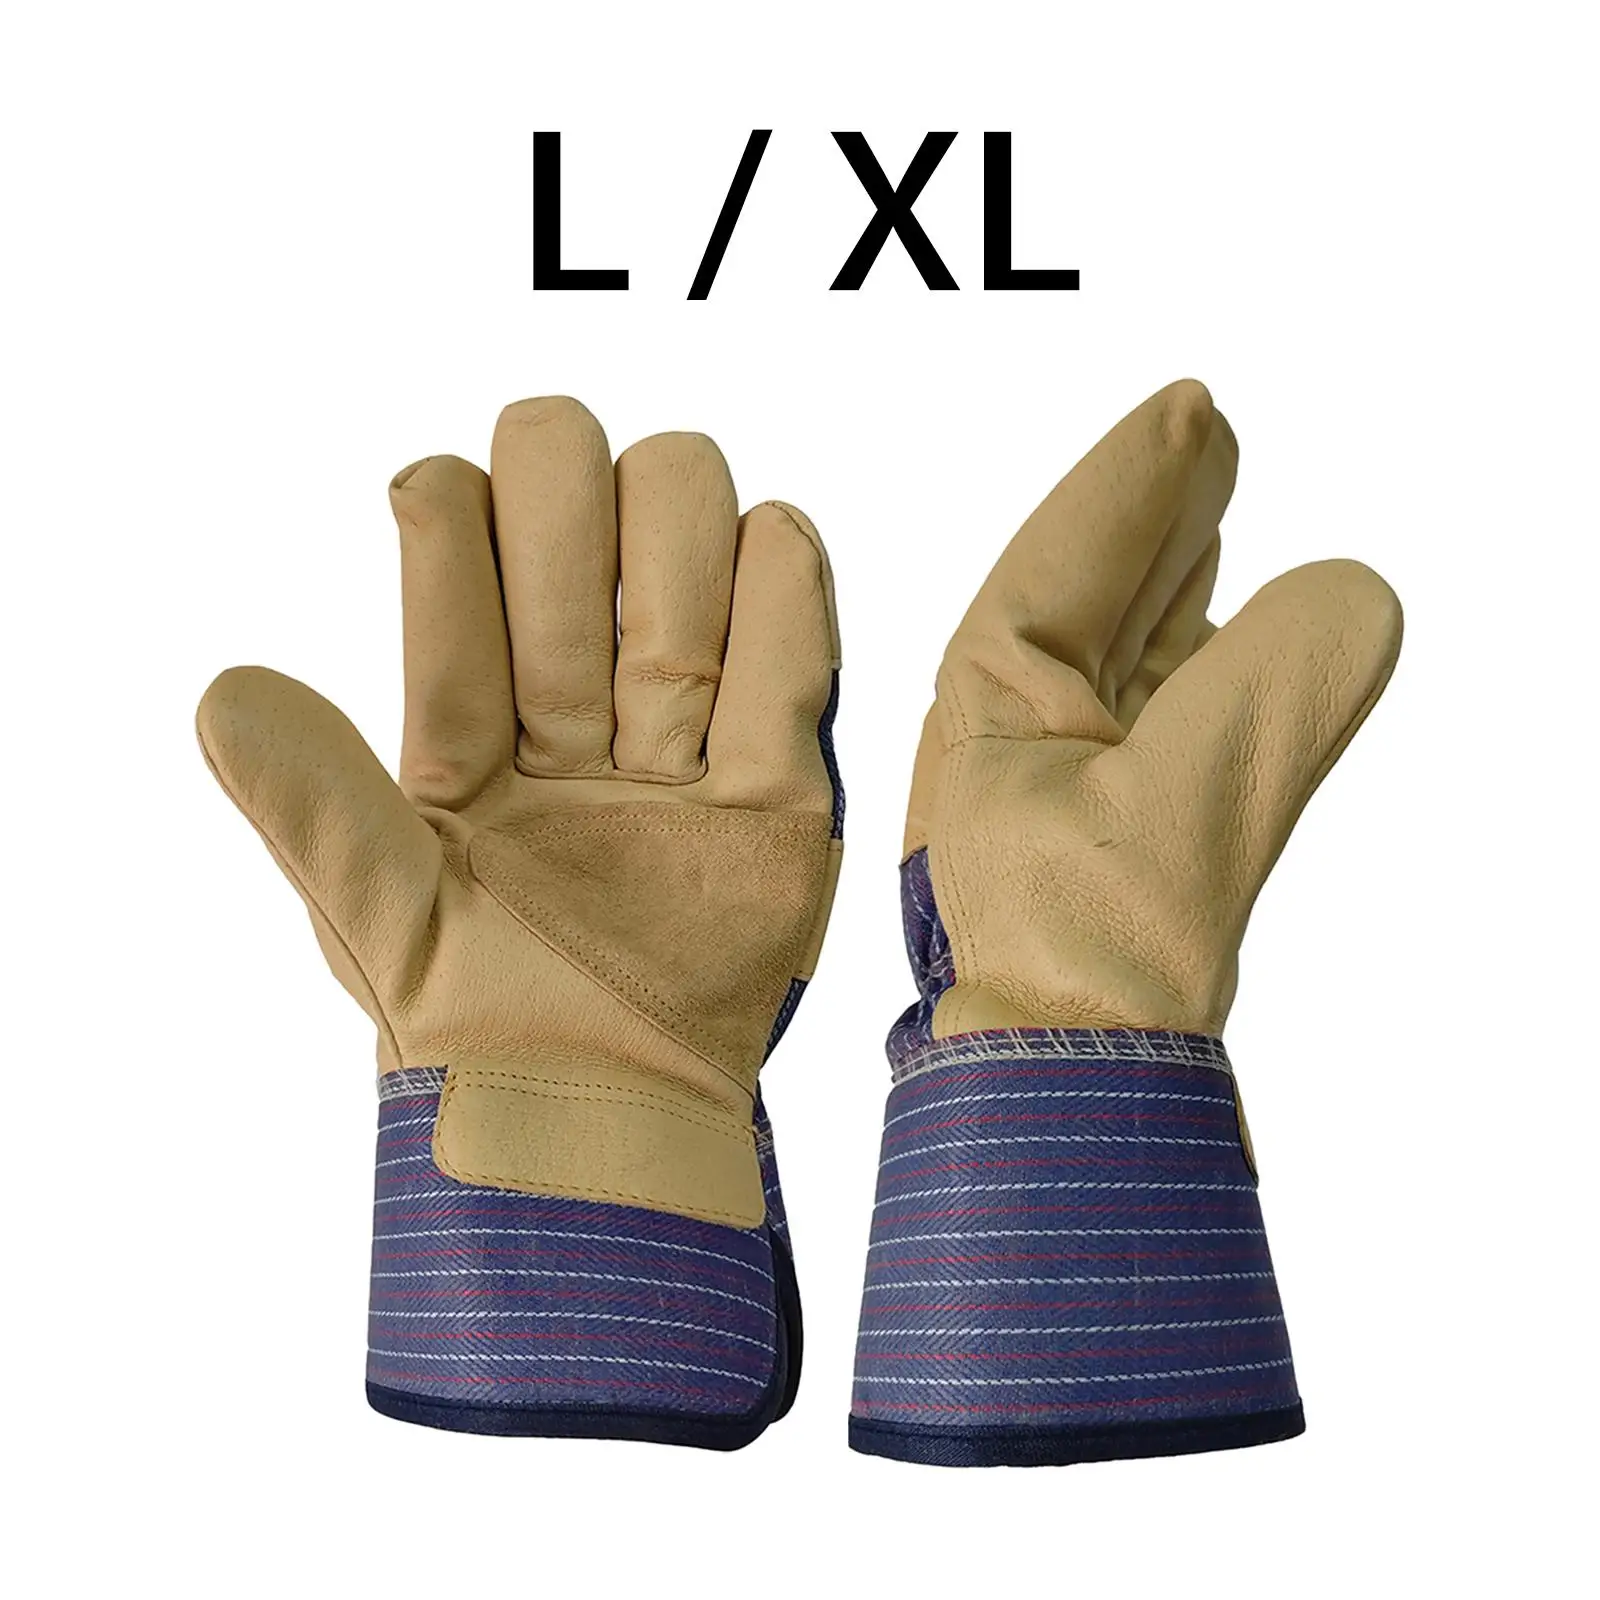 Welding Gloves Durable Heat Insulation Wear Resistant Heavy Duty Heat/Fire Resistant Mitts for Pot Holder Oven Furnace grill